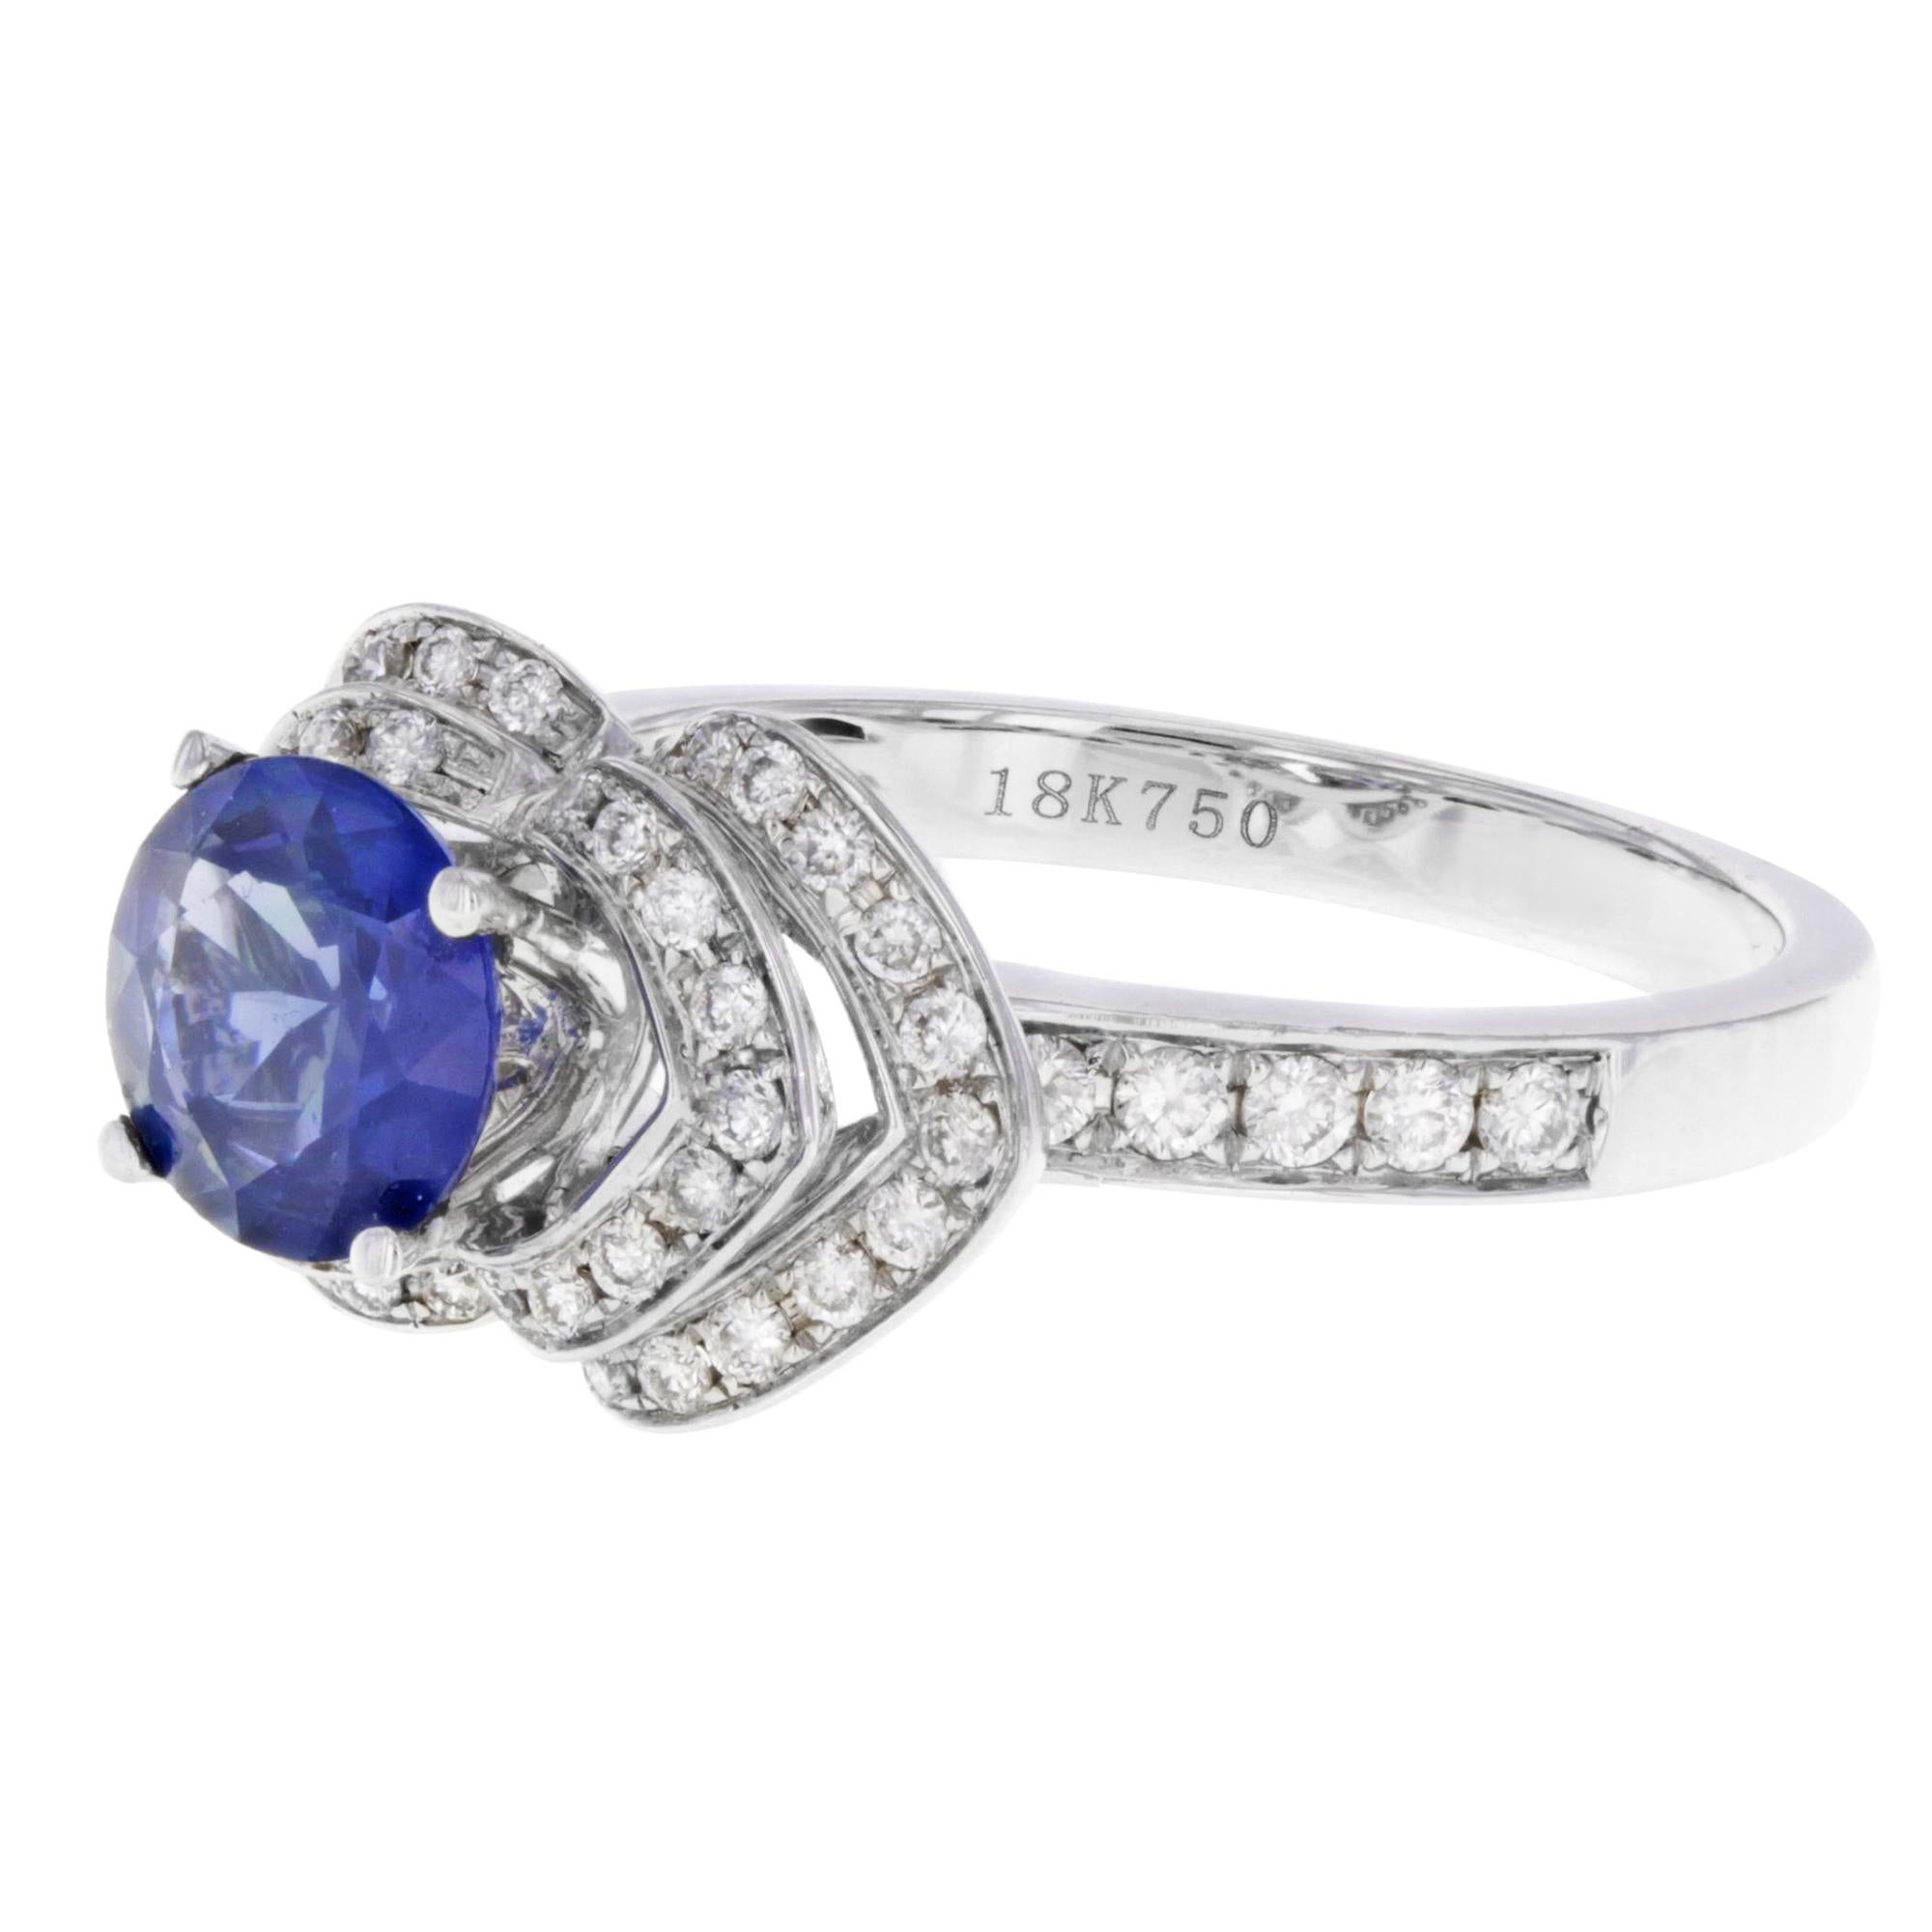 Absolutely beautiful ladies diamond & sapphire ring. The sapphire has a strong intense shade of bright blue, that exhibits great brilliance and wonderful sparkle adorned with 1.15 cttw prong set diamonds. The ring is crafted in 18k white gold. Ring